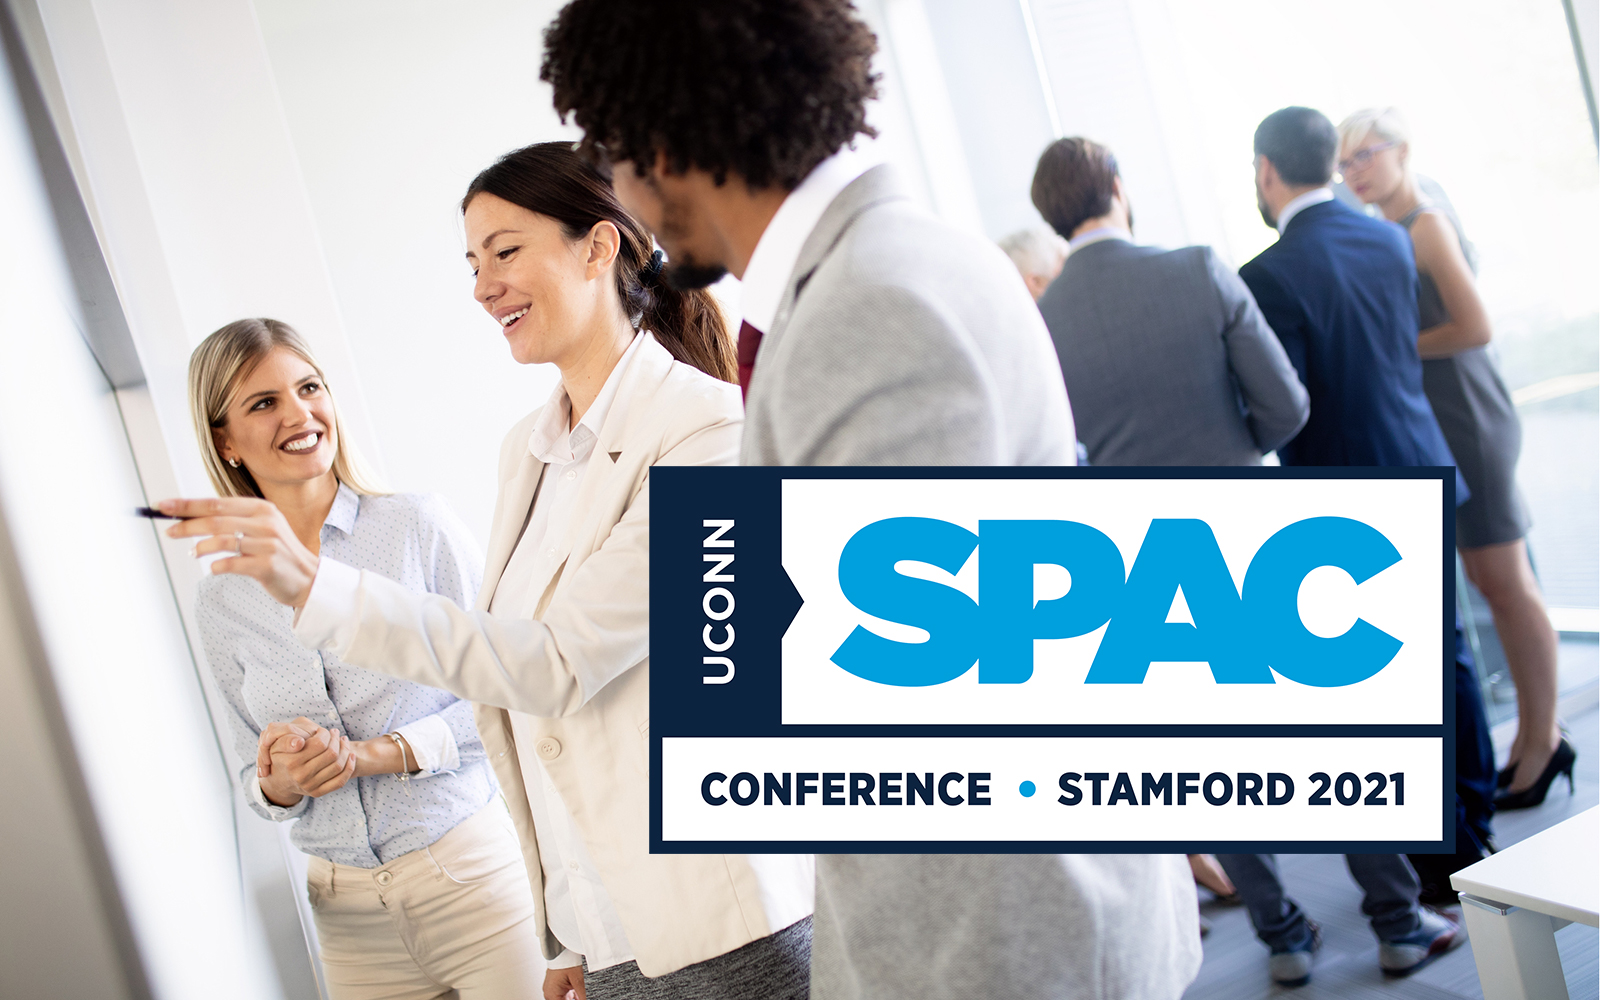 group of people in a conference setting collaborating. UConn SPAC Conference logo bottom right